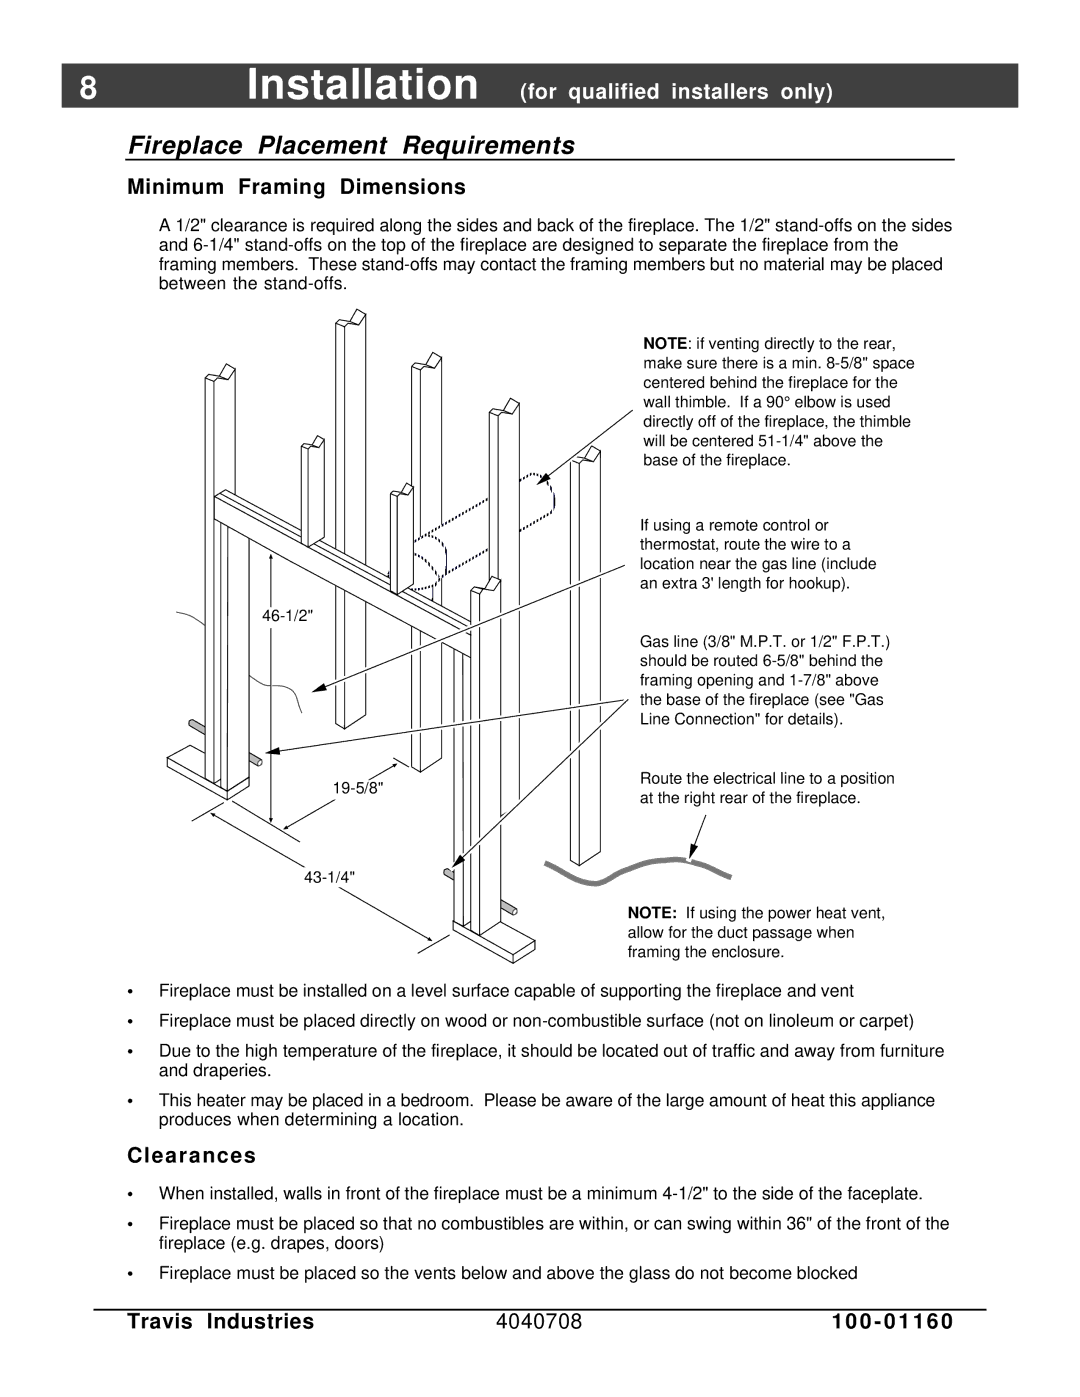 FireplaceXtrordinair 36 DV EFIII owner manual Fireplace Placement Requirements, Minimum Framing Dimensions, Clearances 